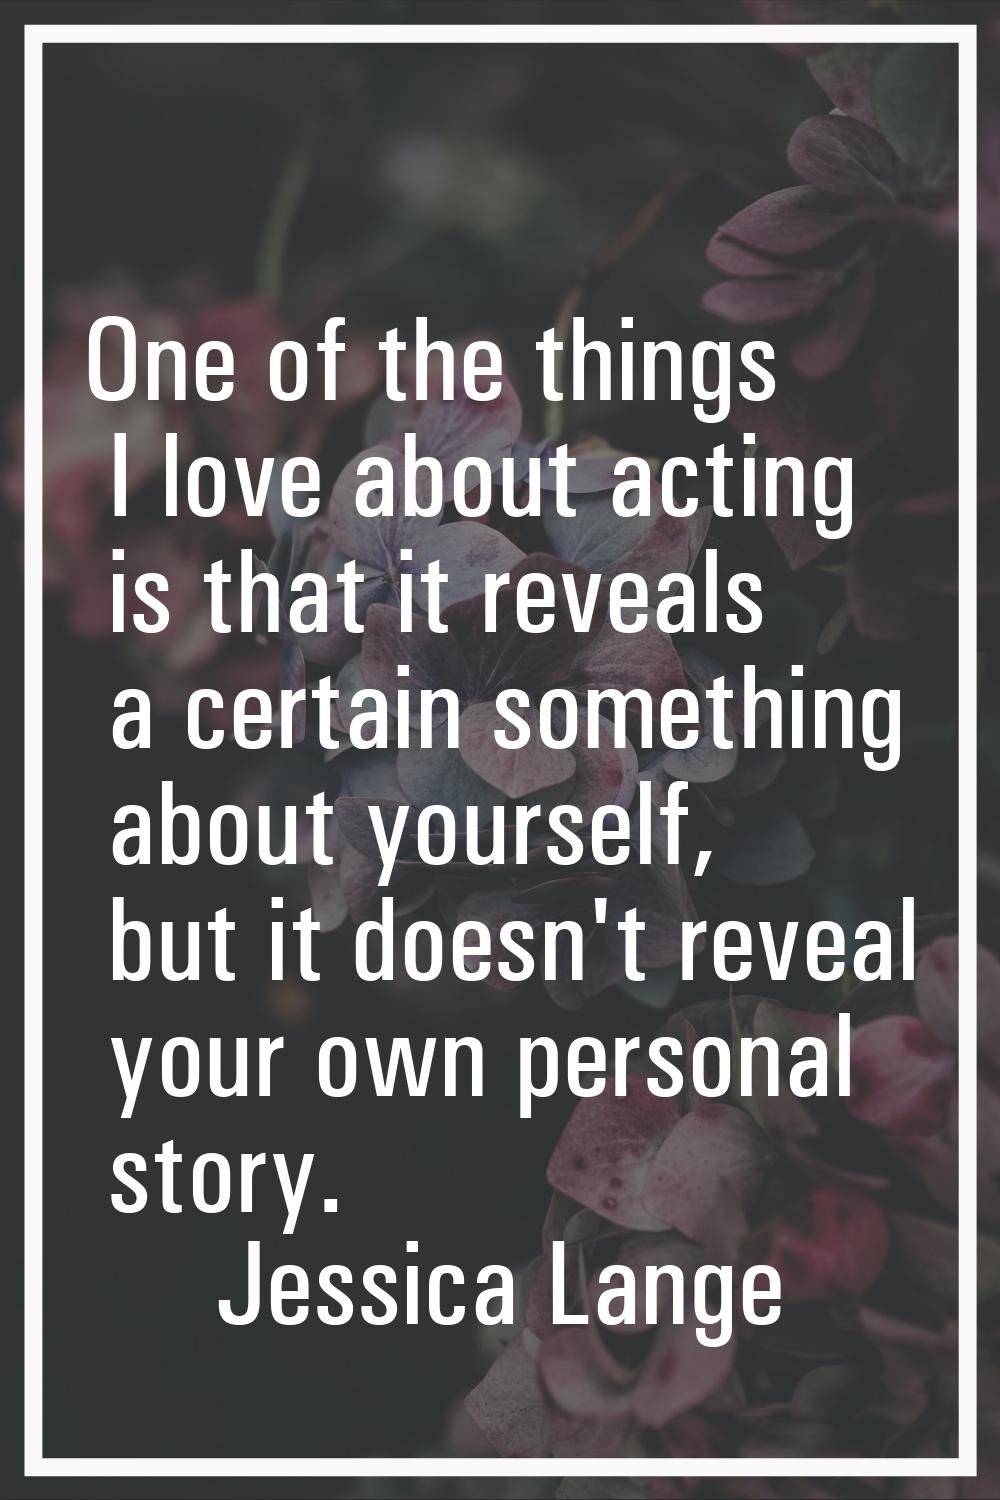 One of the things I love about acting is that it reveals a certain something about yourself, but it